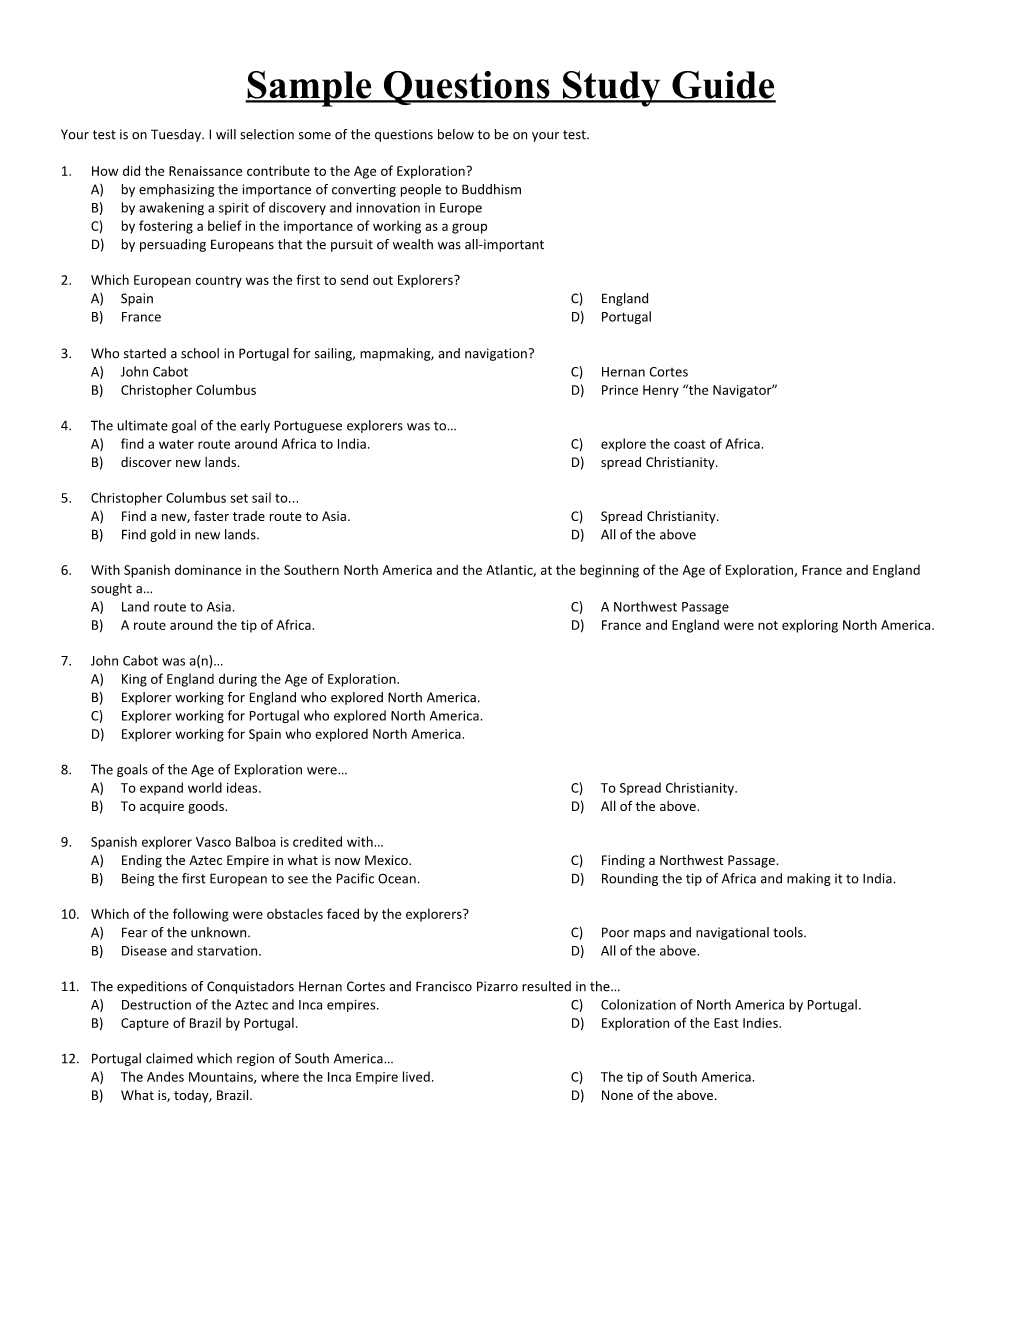 Sample Questions Study Guide